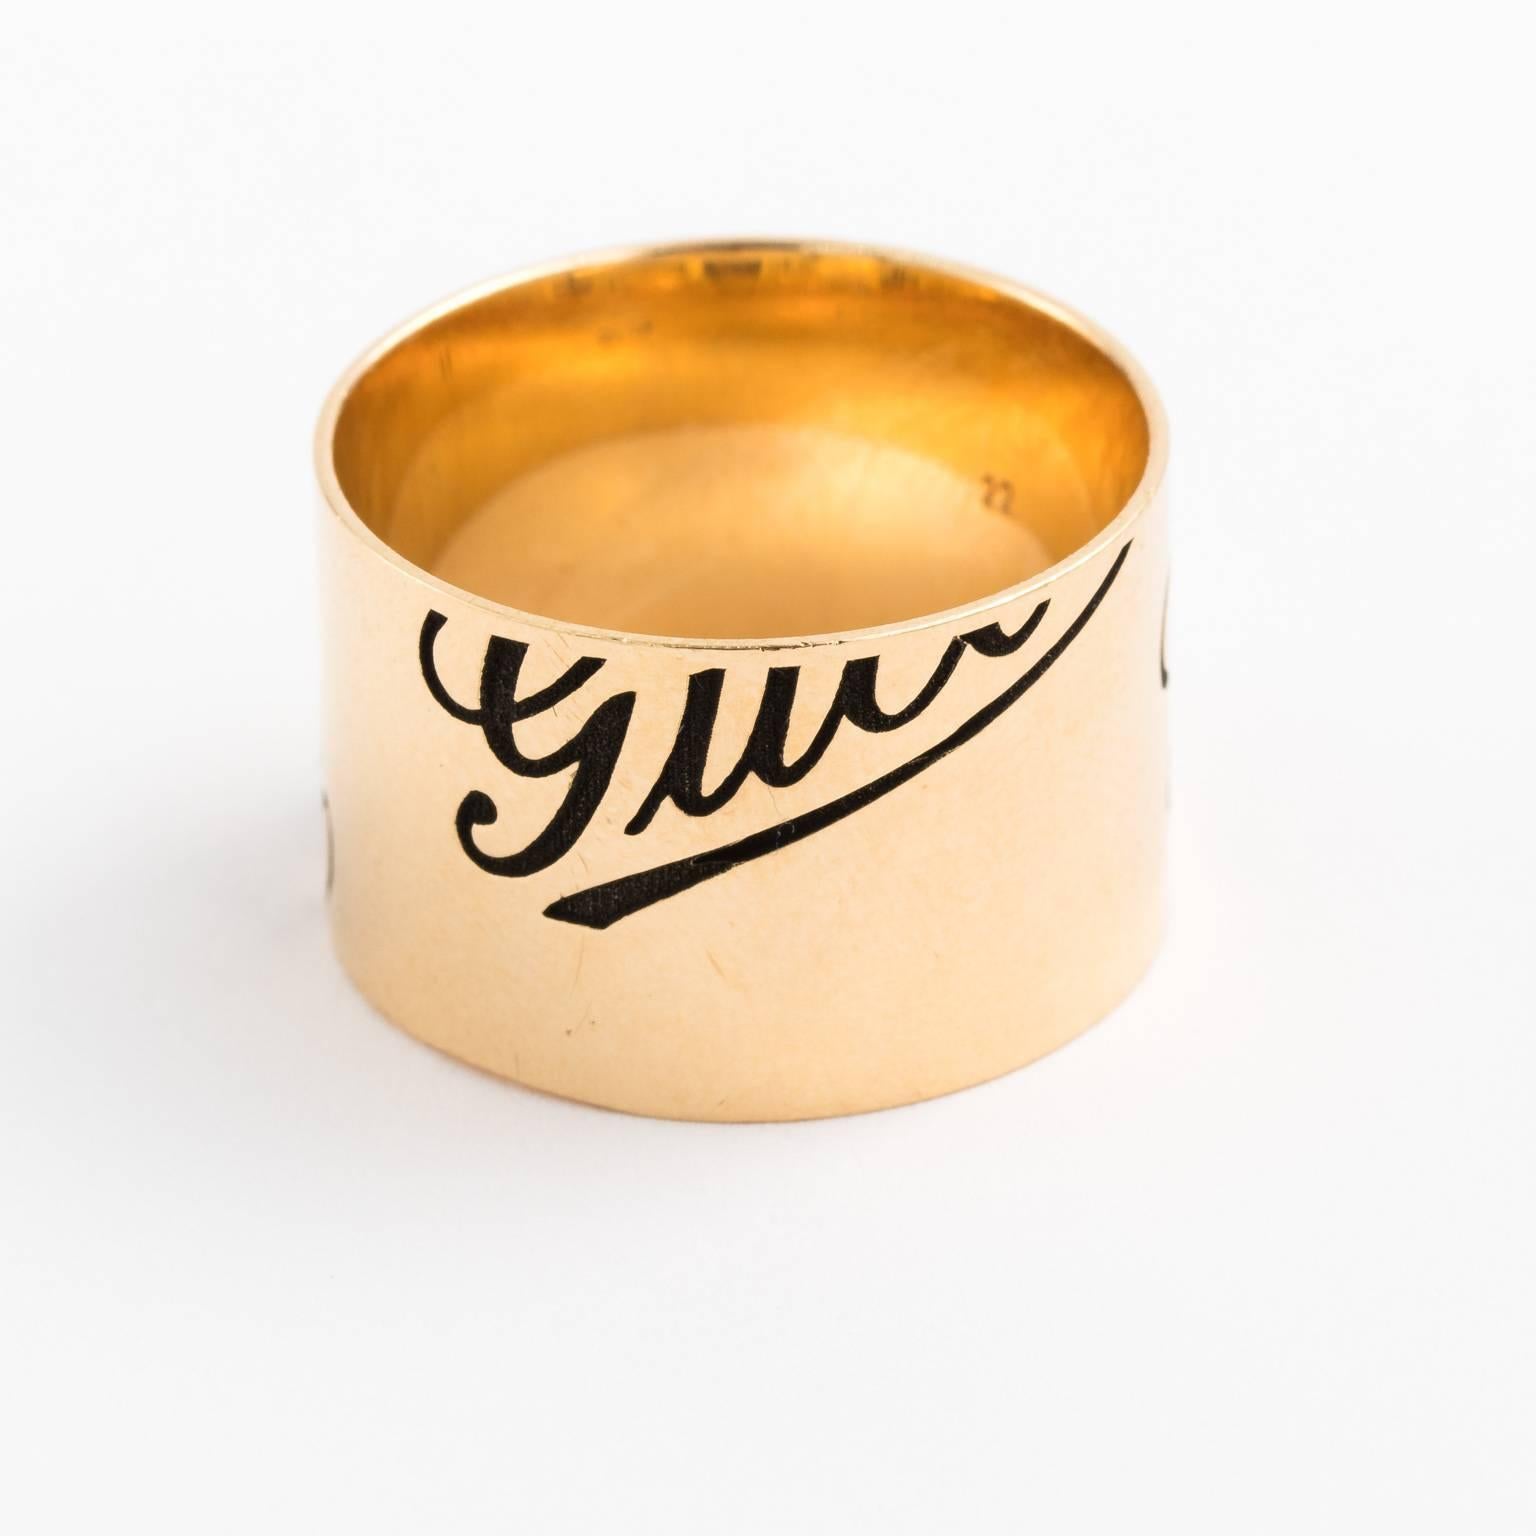 Gucci Gold Band Ring In Excellent Condition For Sale In St.amford, CT